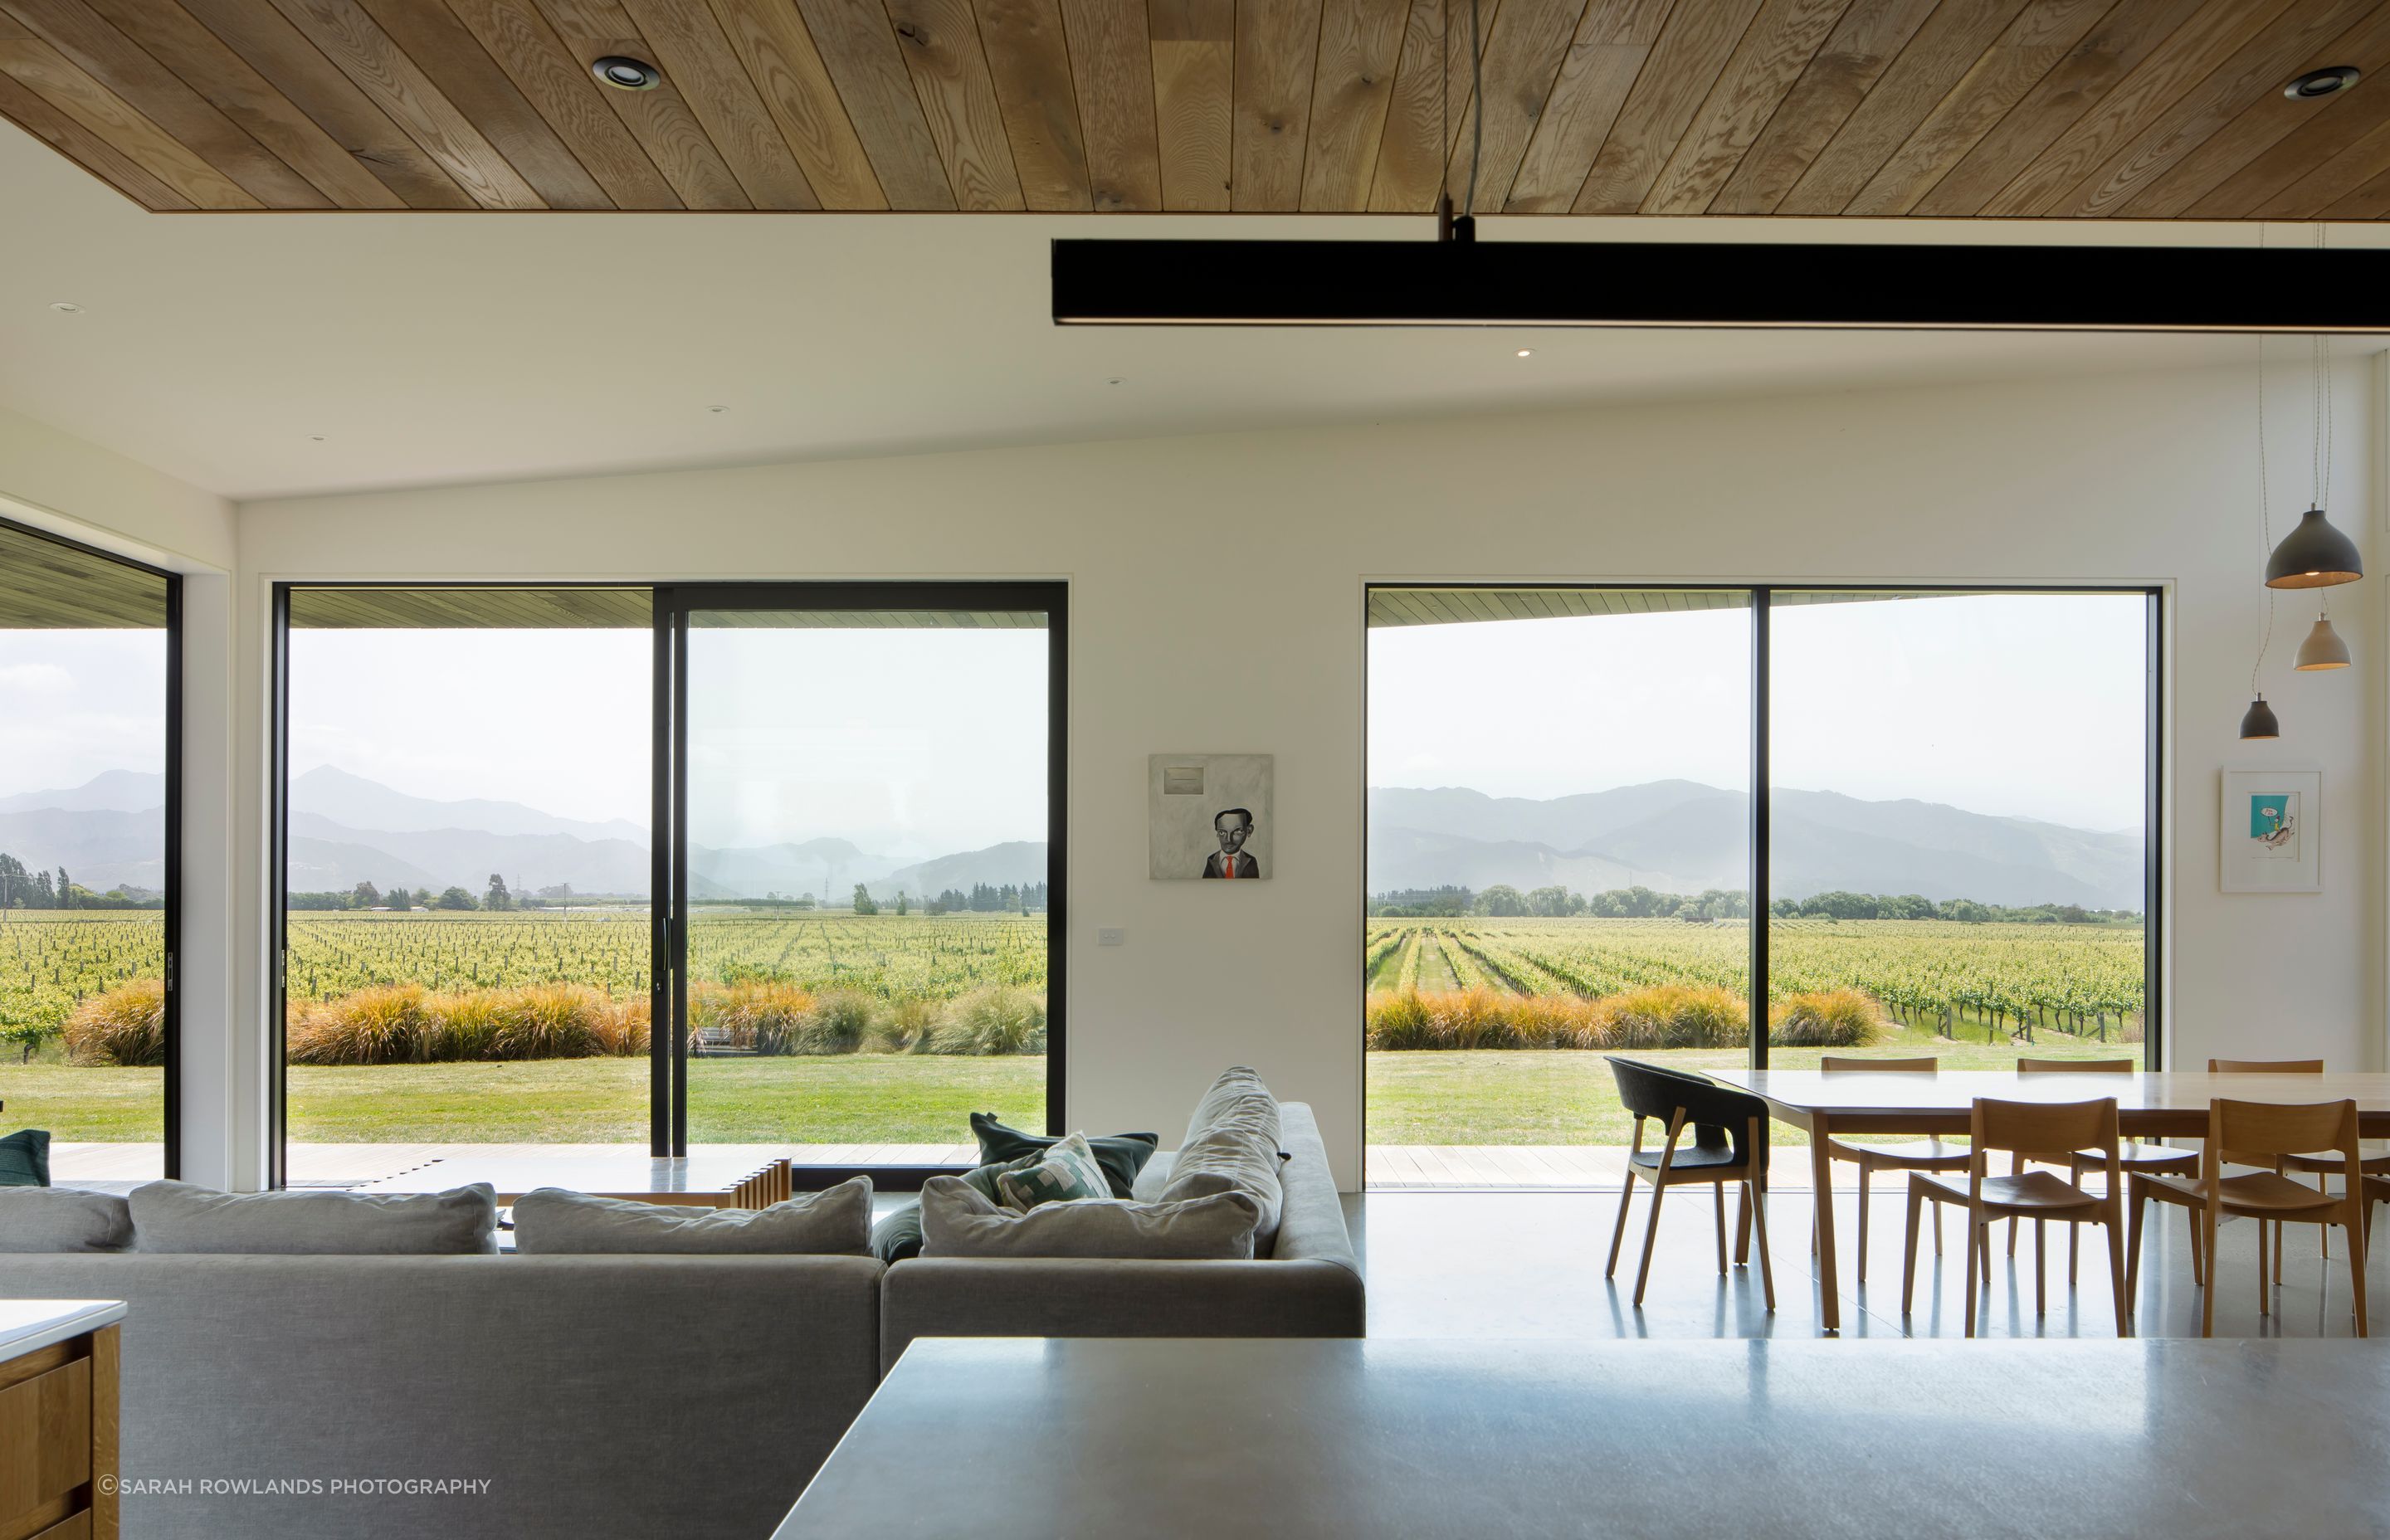 Multiple wide apertures connect the open-plan living area with the view across the valley towards the hills in the distance.